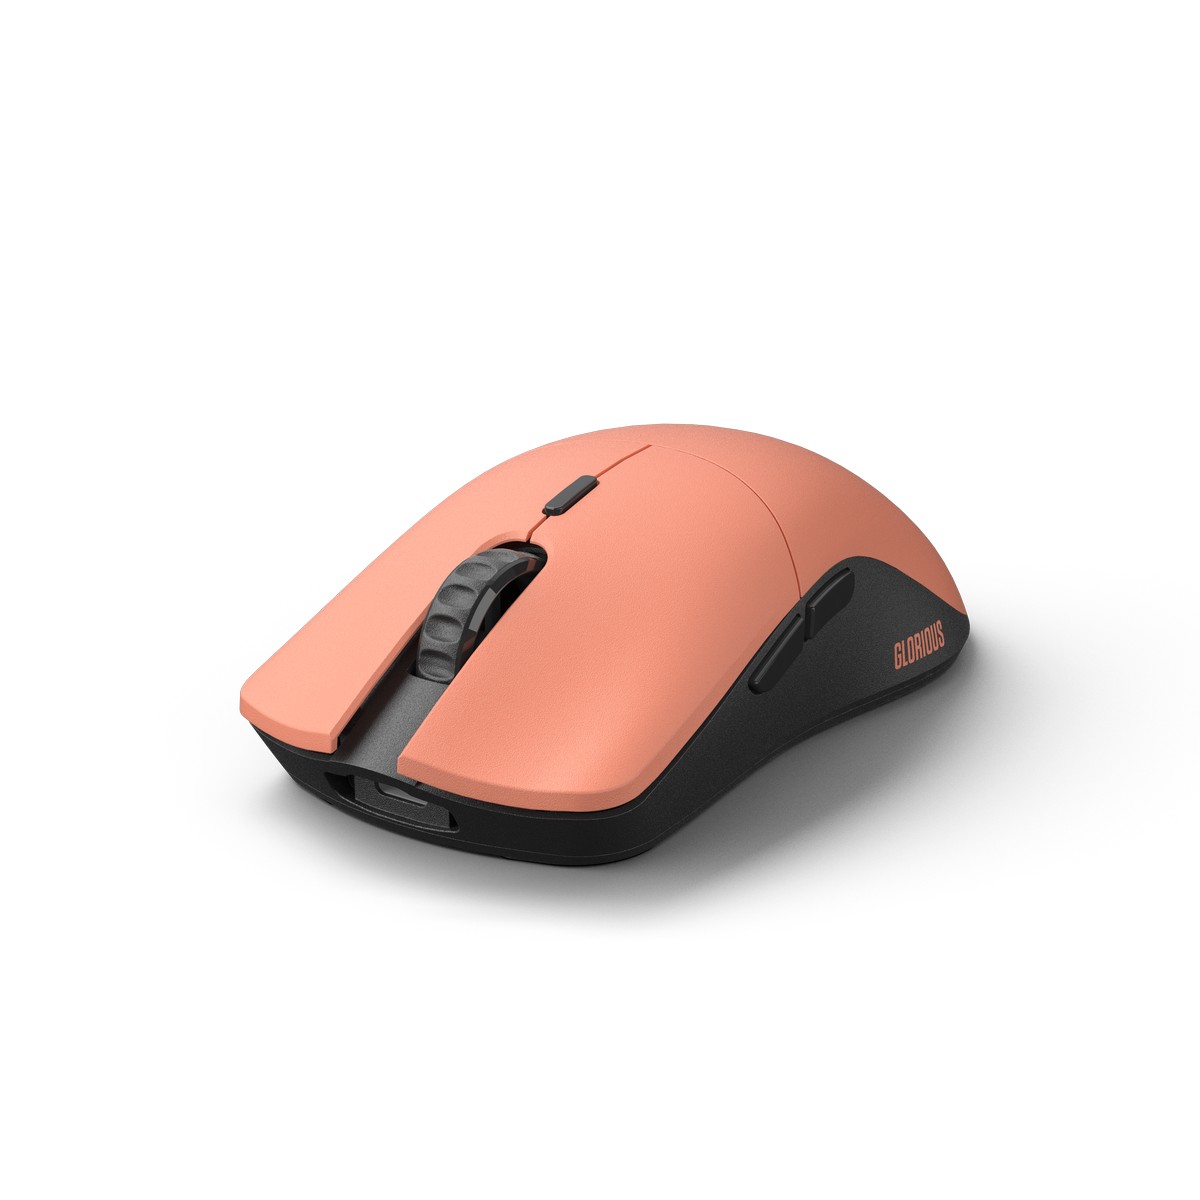 Glorious Model O PRO Wireless Optical Gaming Mouse - Red Fox (GLO-MS-OW-RF-FORGE)